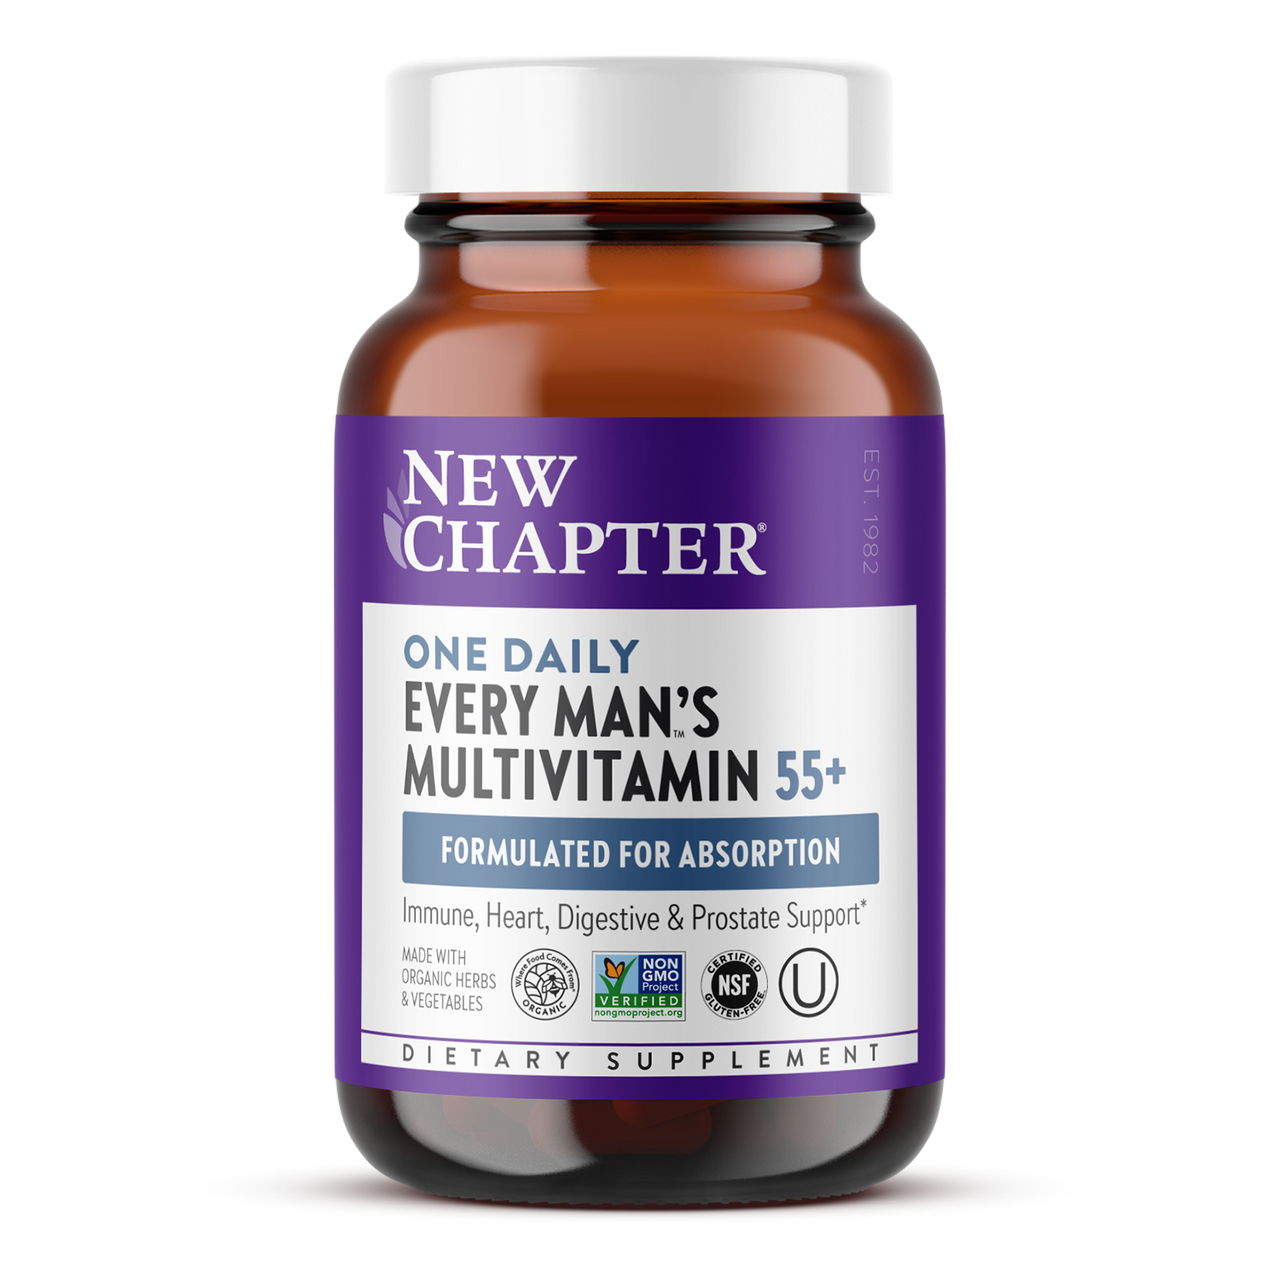 Every Man™'s One Daily 55+ Multivitamin